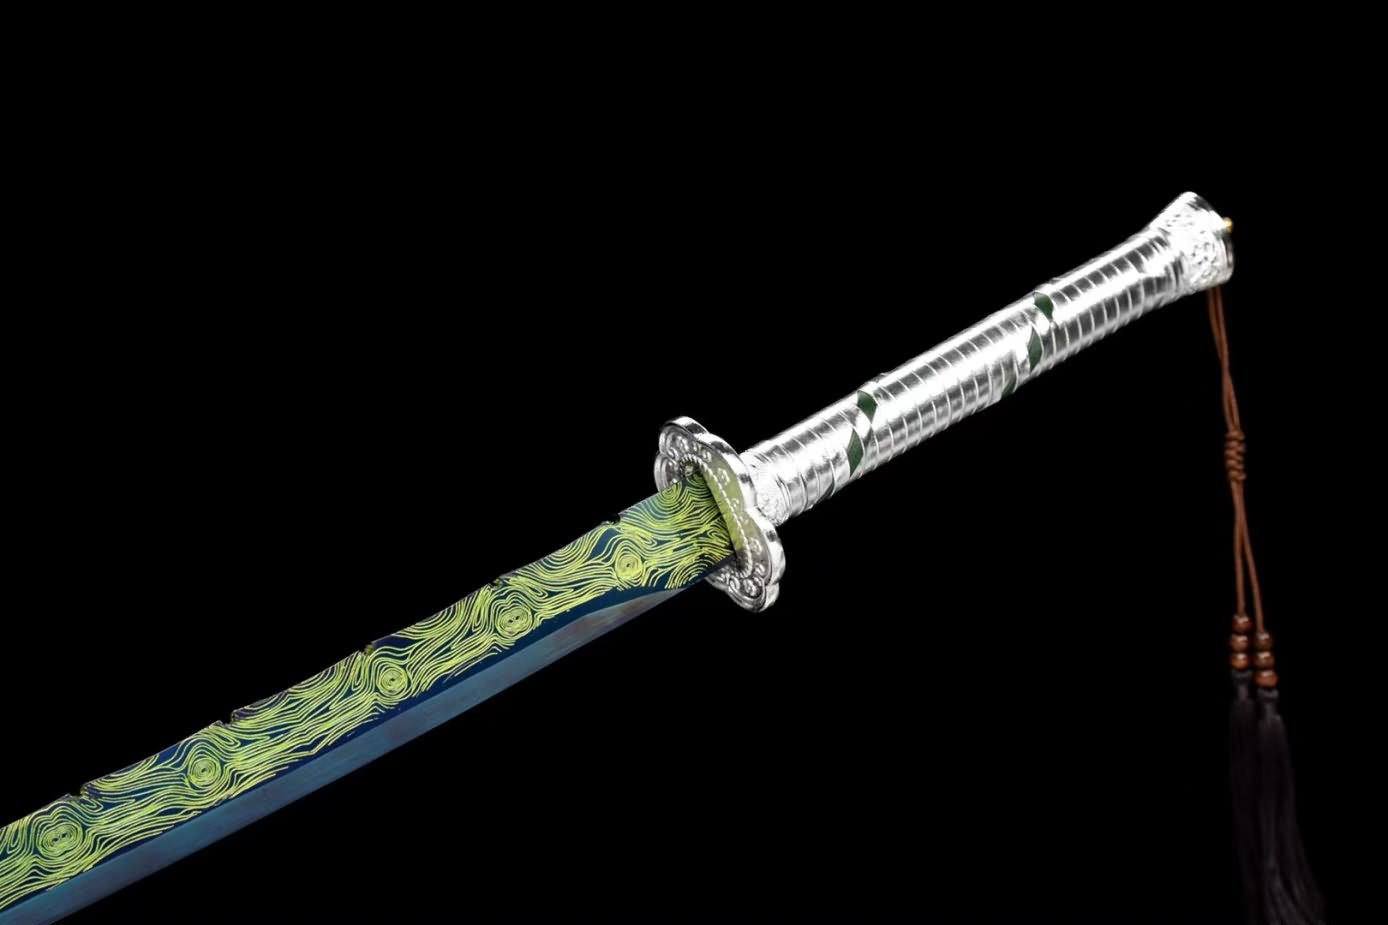 chinese sword,Brotherhood of Blades high Carbon Steel,Alloy Fittings,Wood PU Scabbard,LOONGSWORD